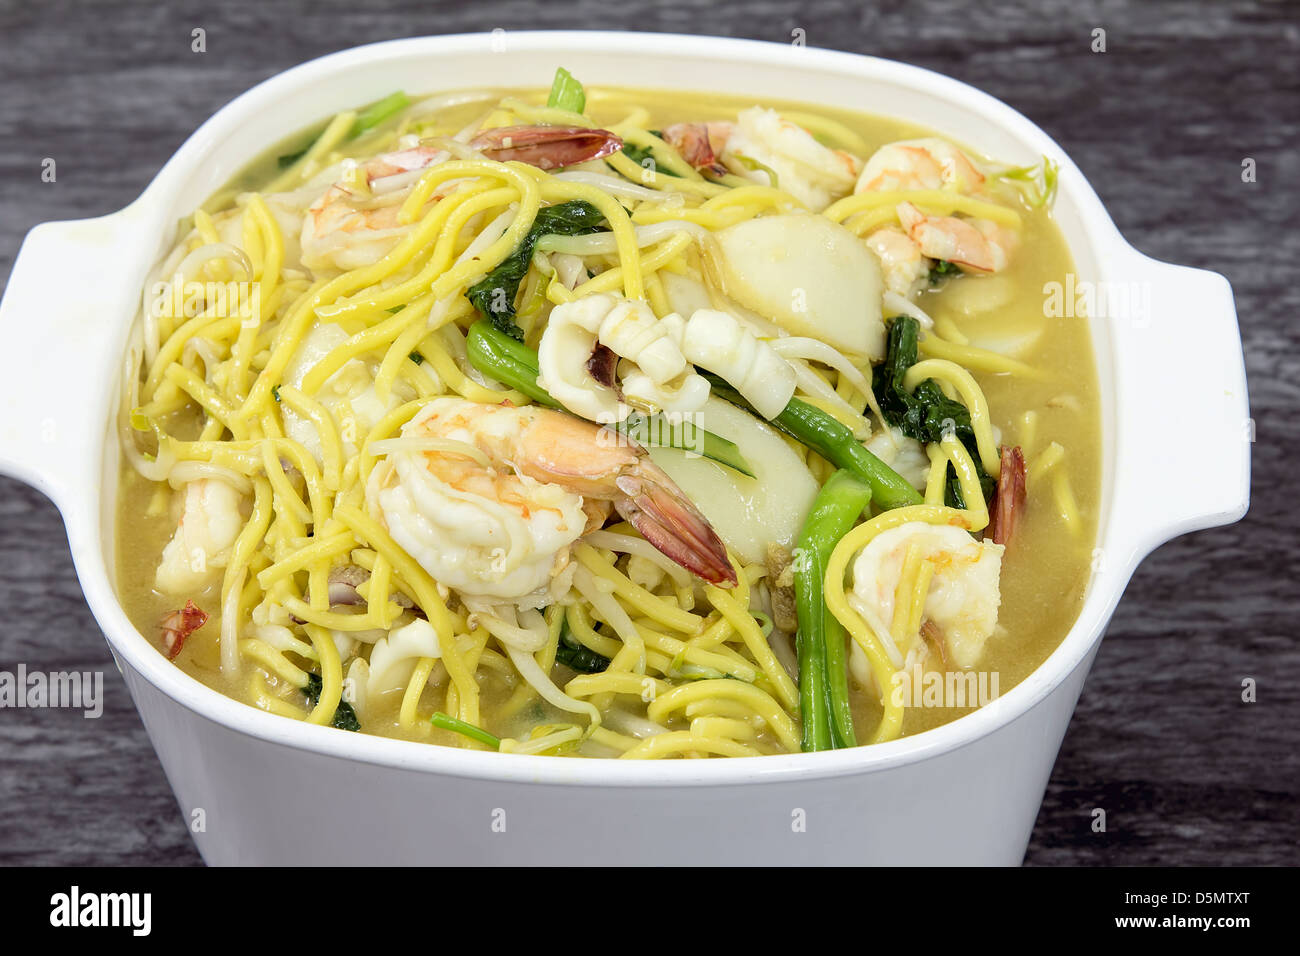 Hokkien Mee Stir Fry Yellow Noodles with Prawns Squids Fishcake and Green Vegetables Stock Photo